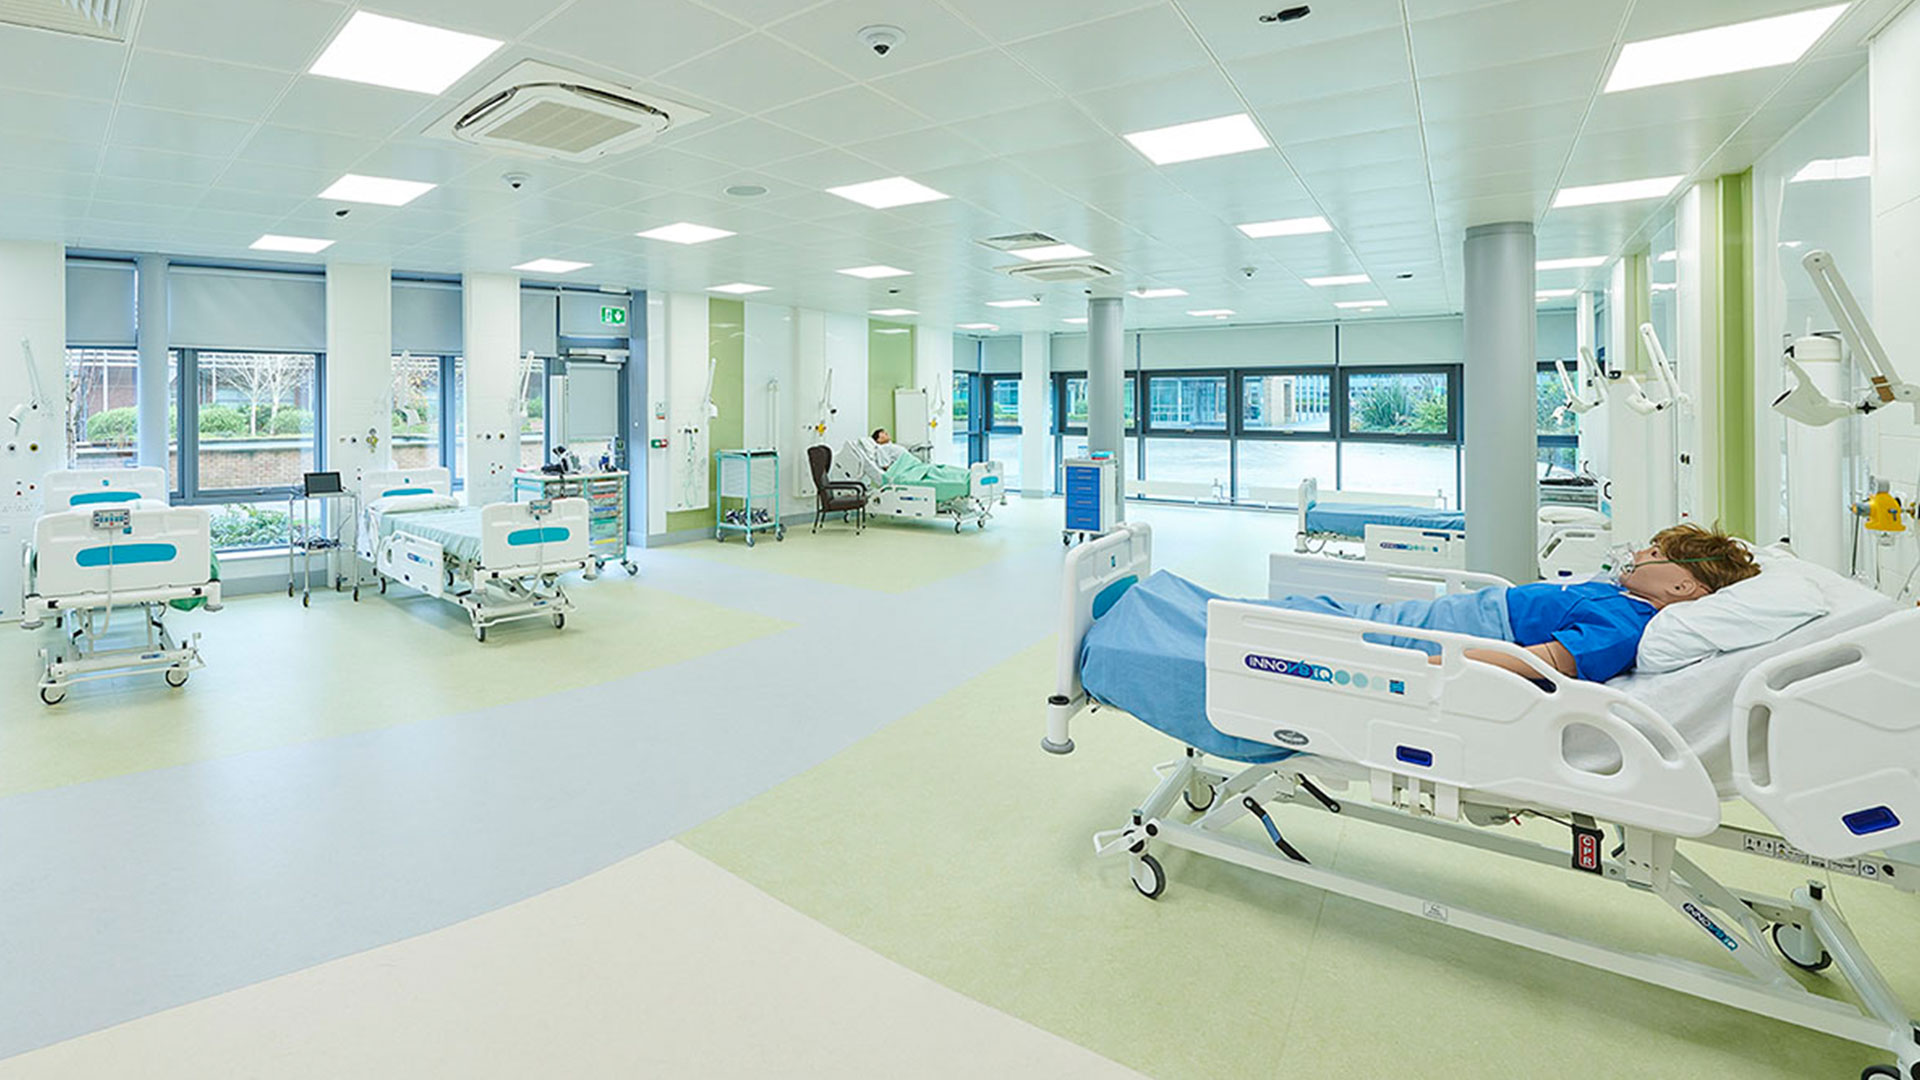 Large simulation ward with mannequins in hospital beds in the Clinical Skills and Simulation Centre building